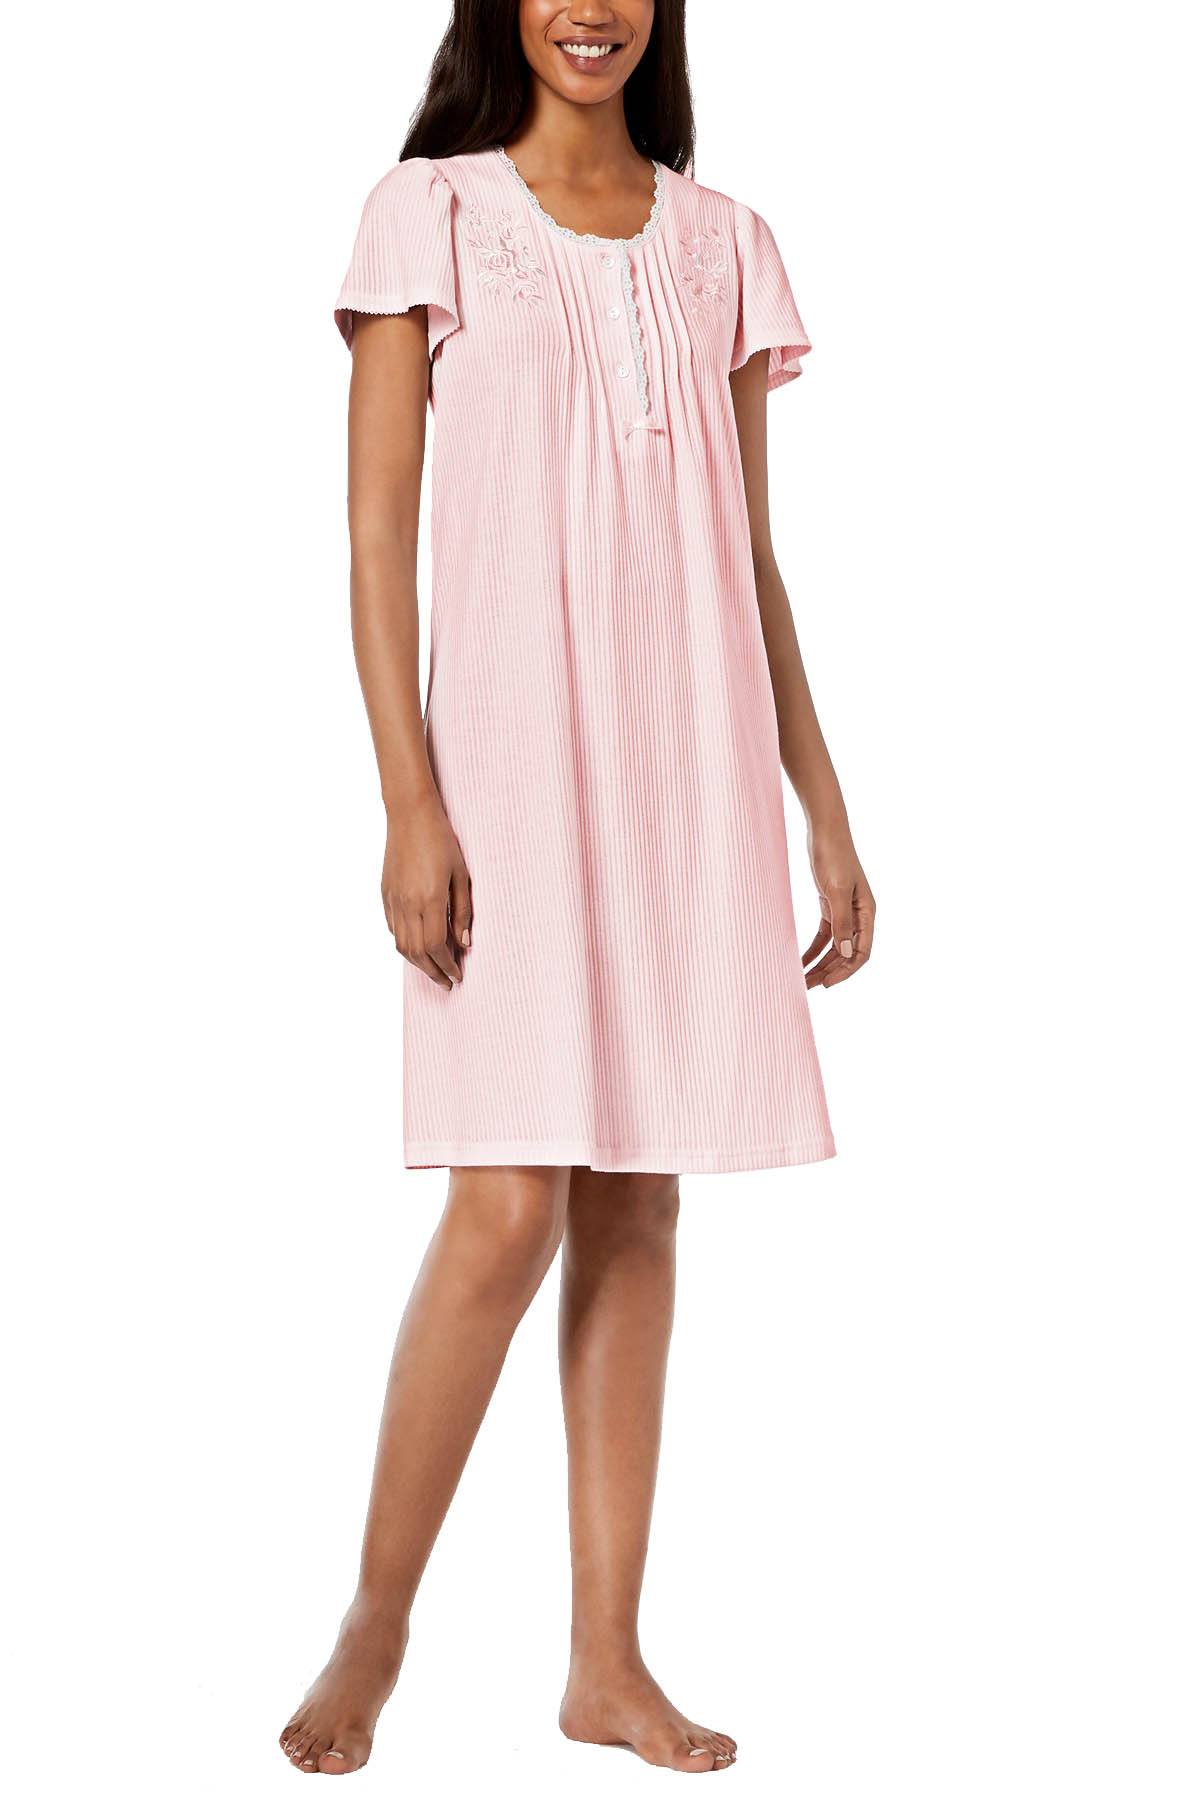 Miss Elaine Pink Texture Striped Embroidered Short Nightgown